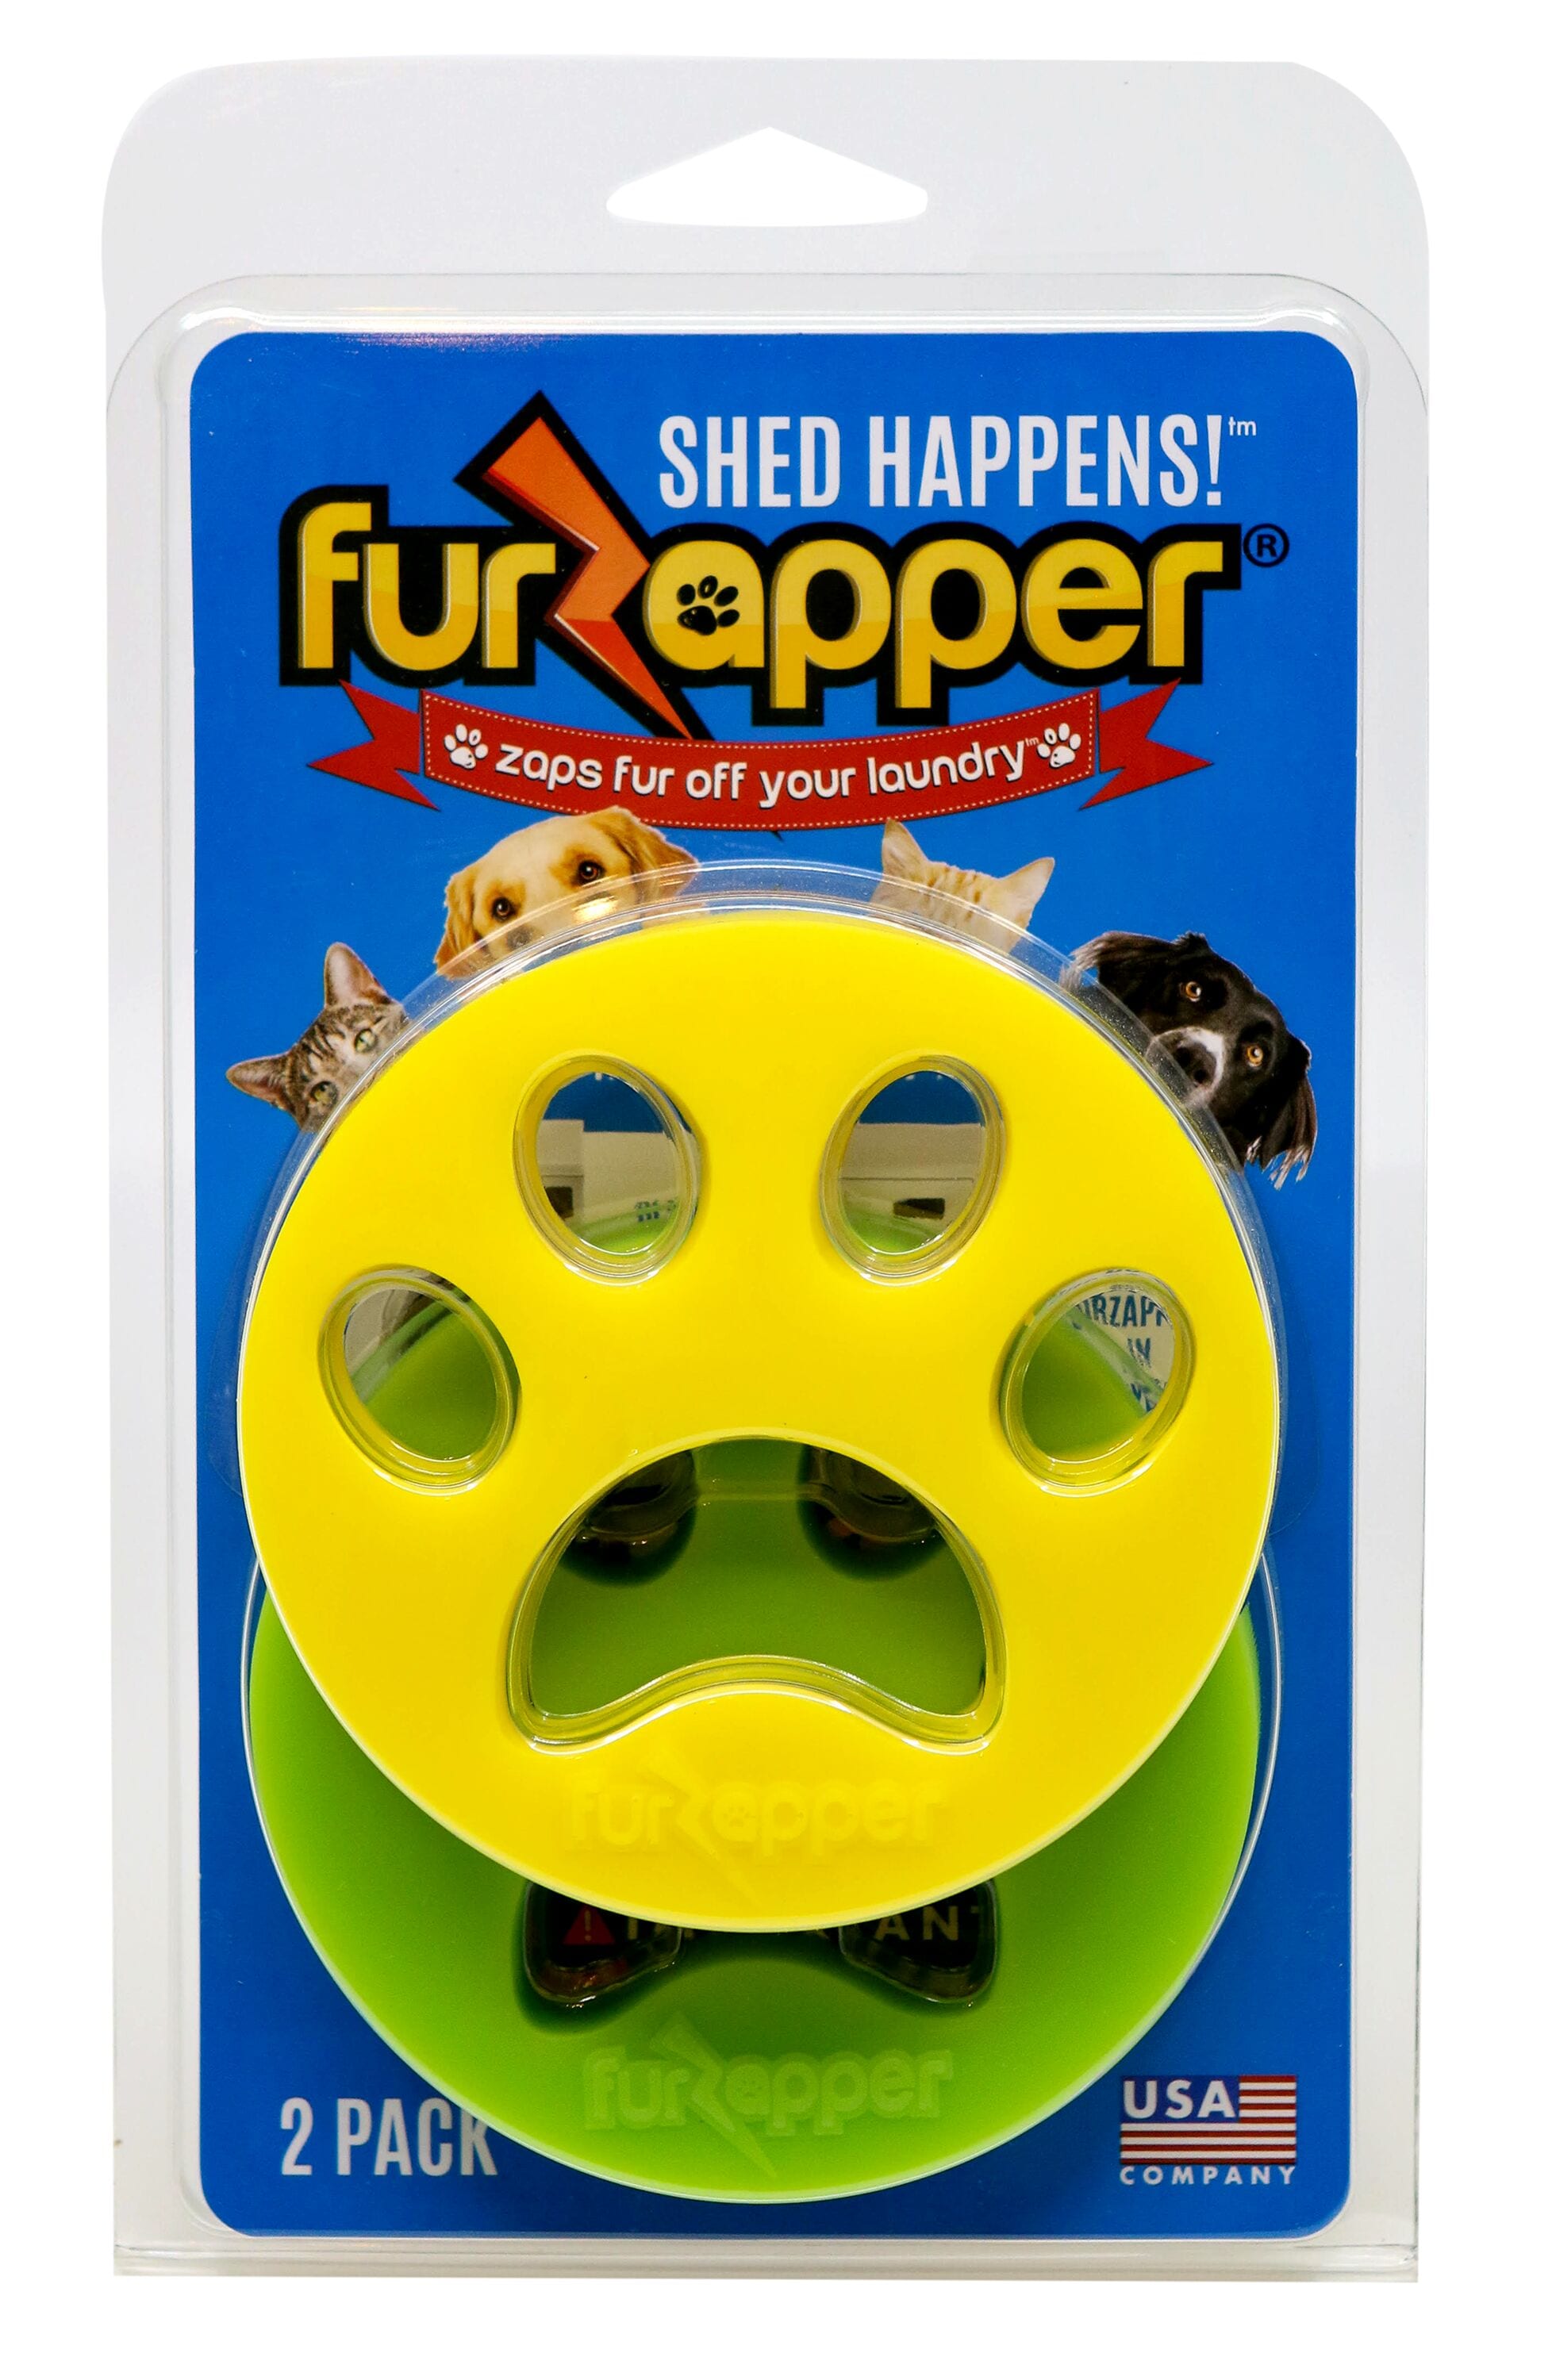 FurZapper FurZapper discs remove pet hair and fur from your